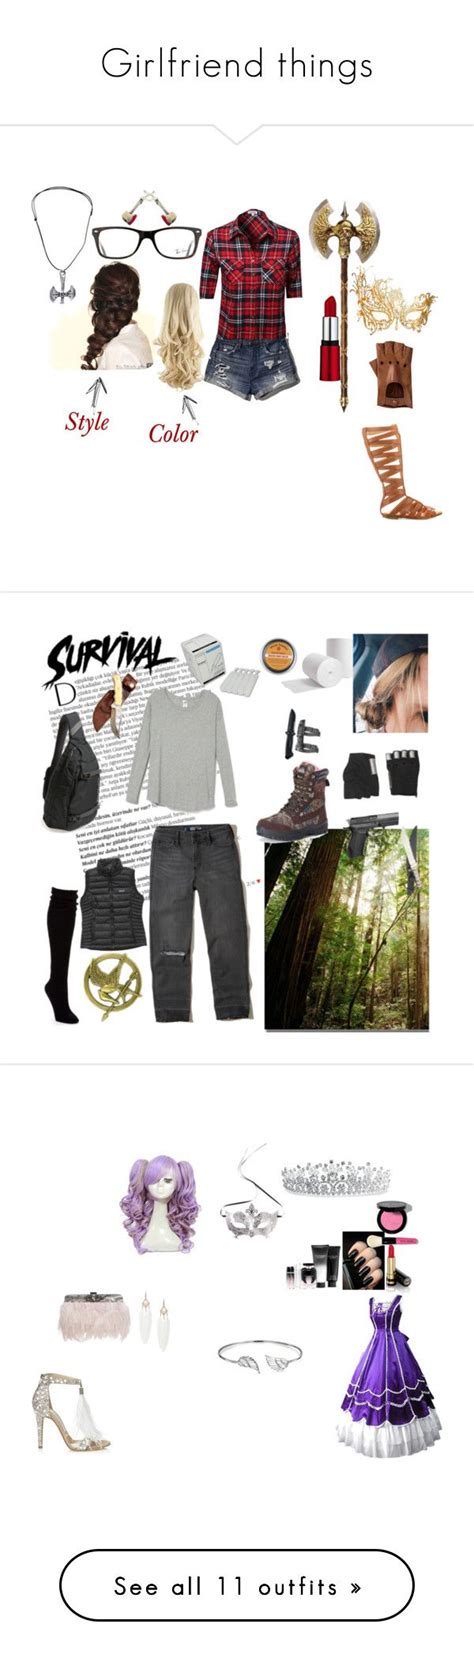 Girlfriend Things By Toxic Coodere Liked On Polyvore Featuring Gx